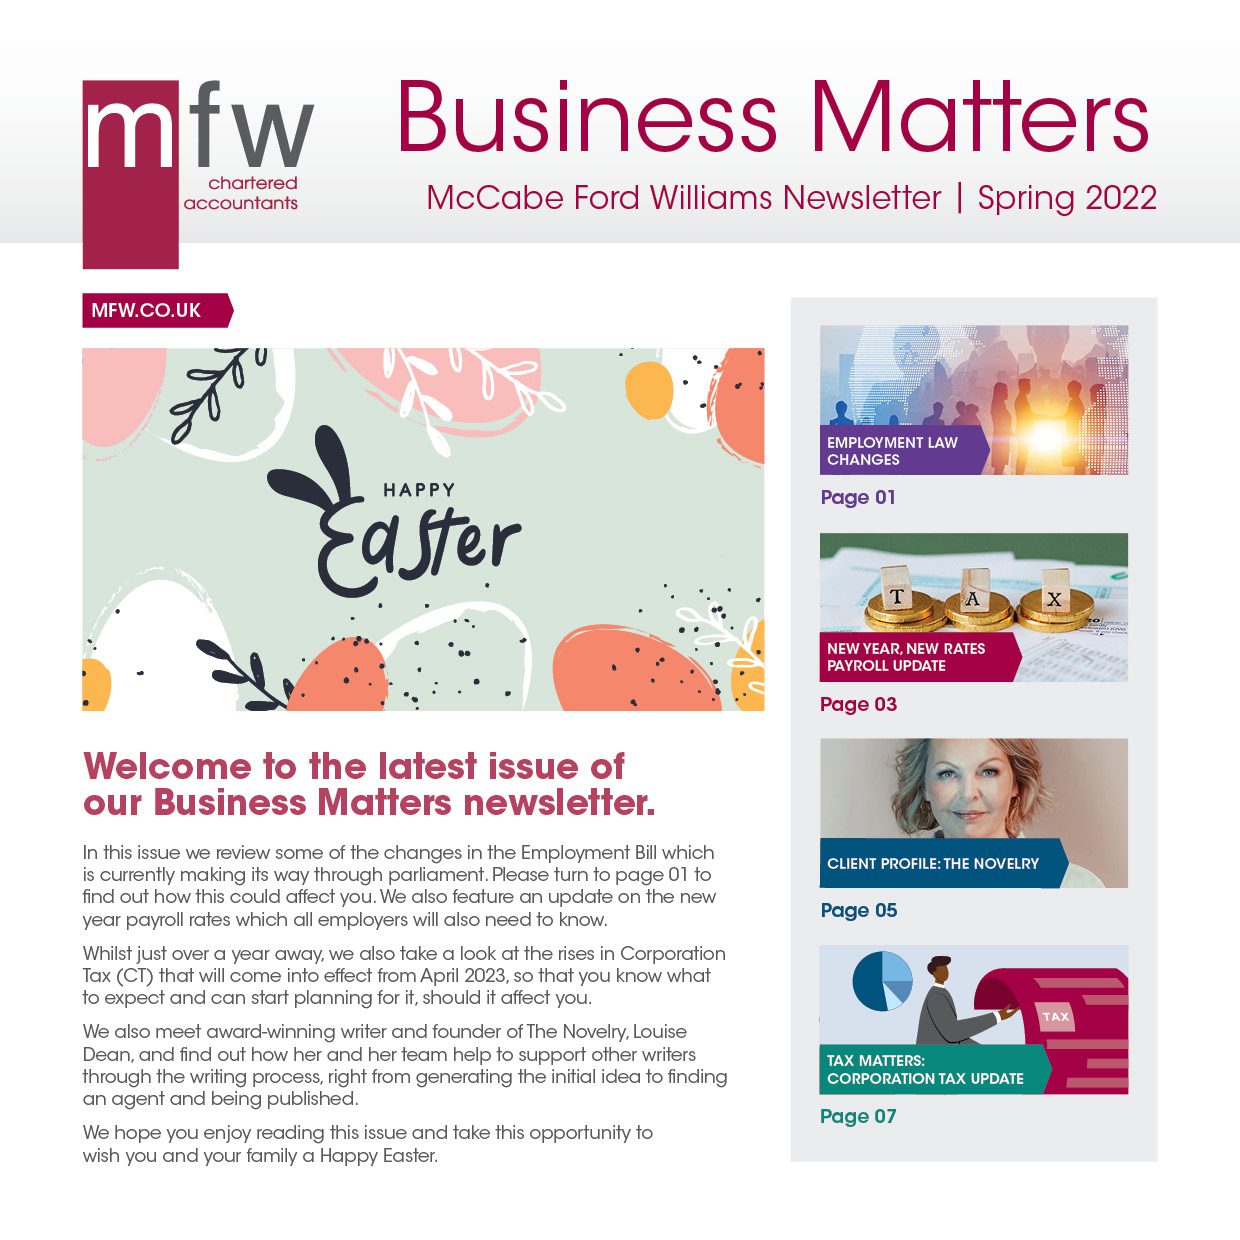 MFW Business Matters spring 2022 newsletter